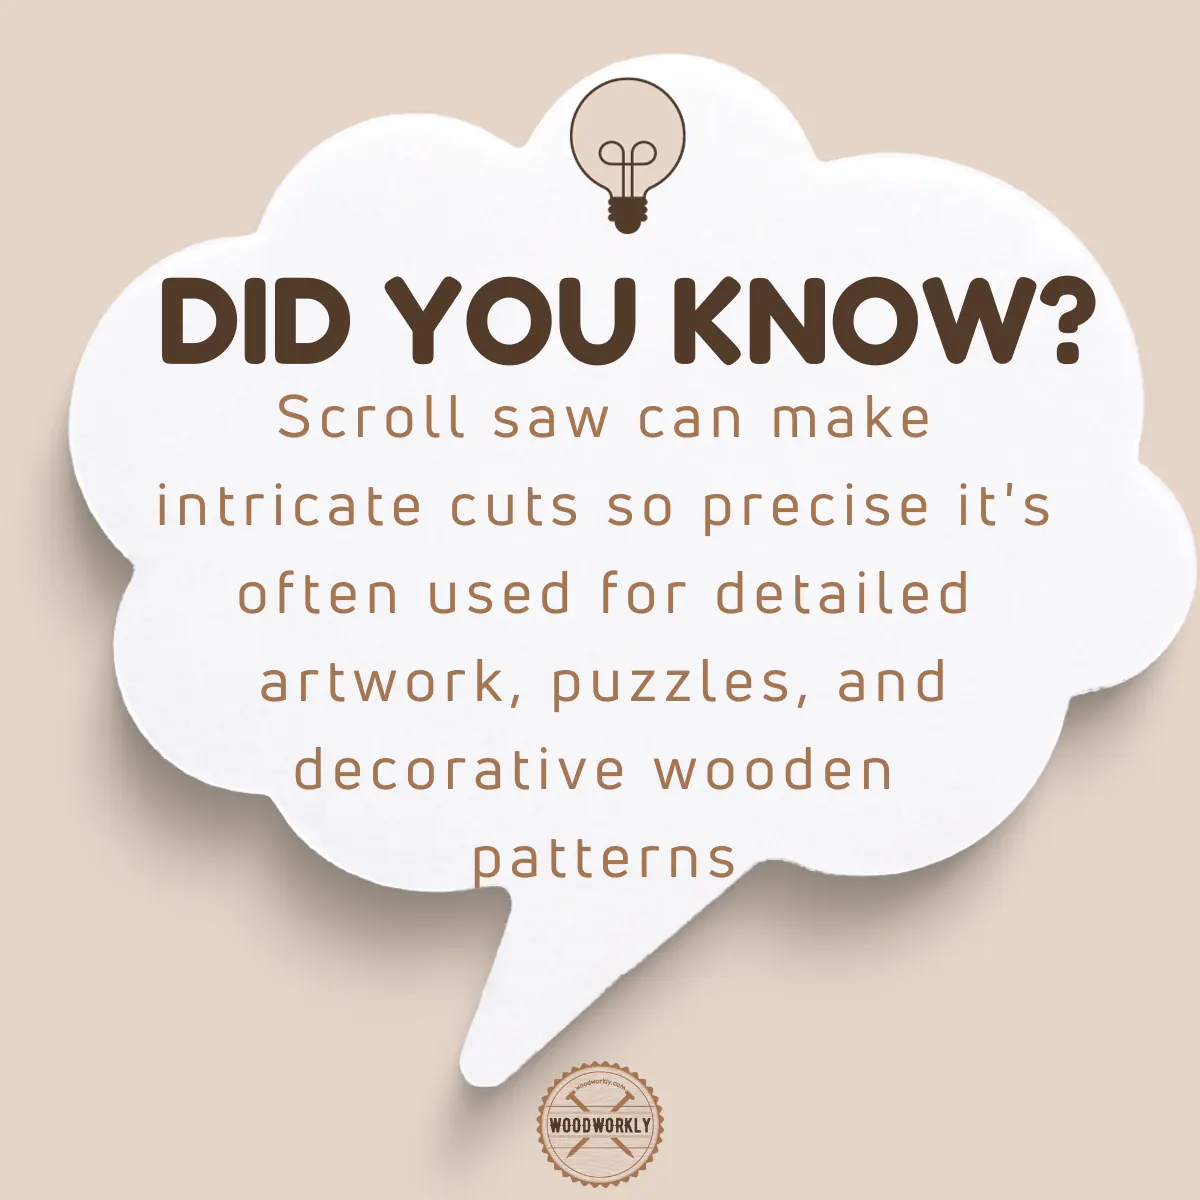 Did you know fact about scroll saw